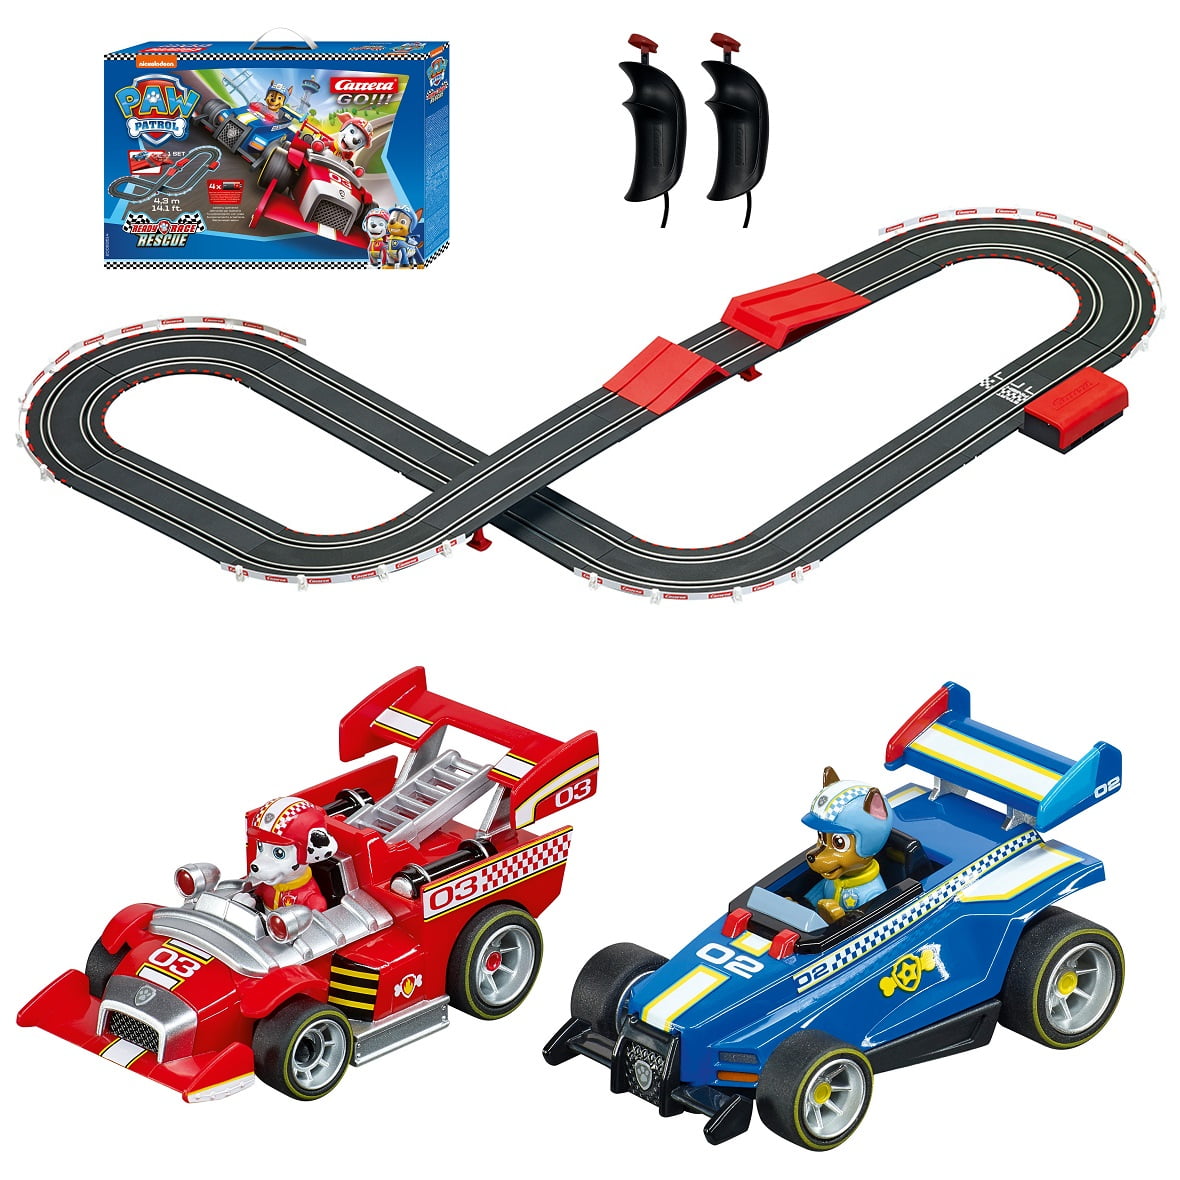 Carrera Go Slot Car Race Track Speed Controllers With Power Cord